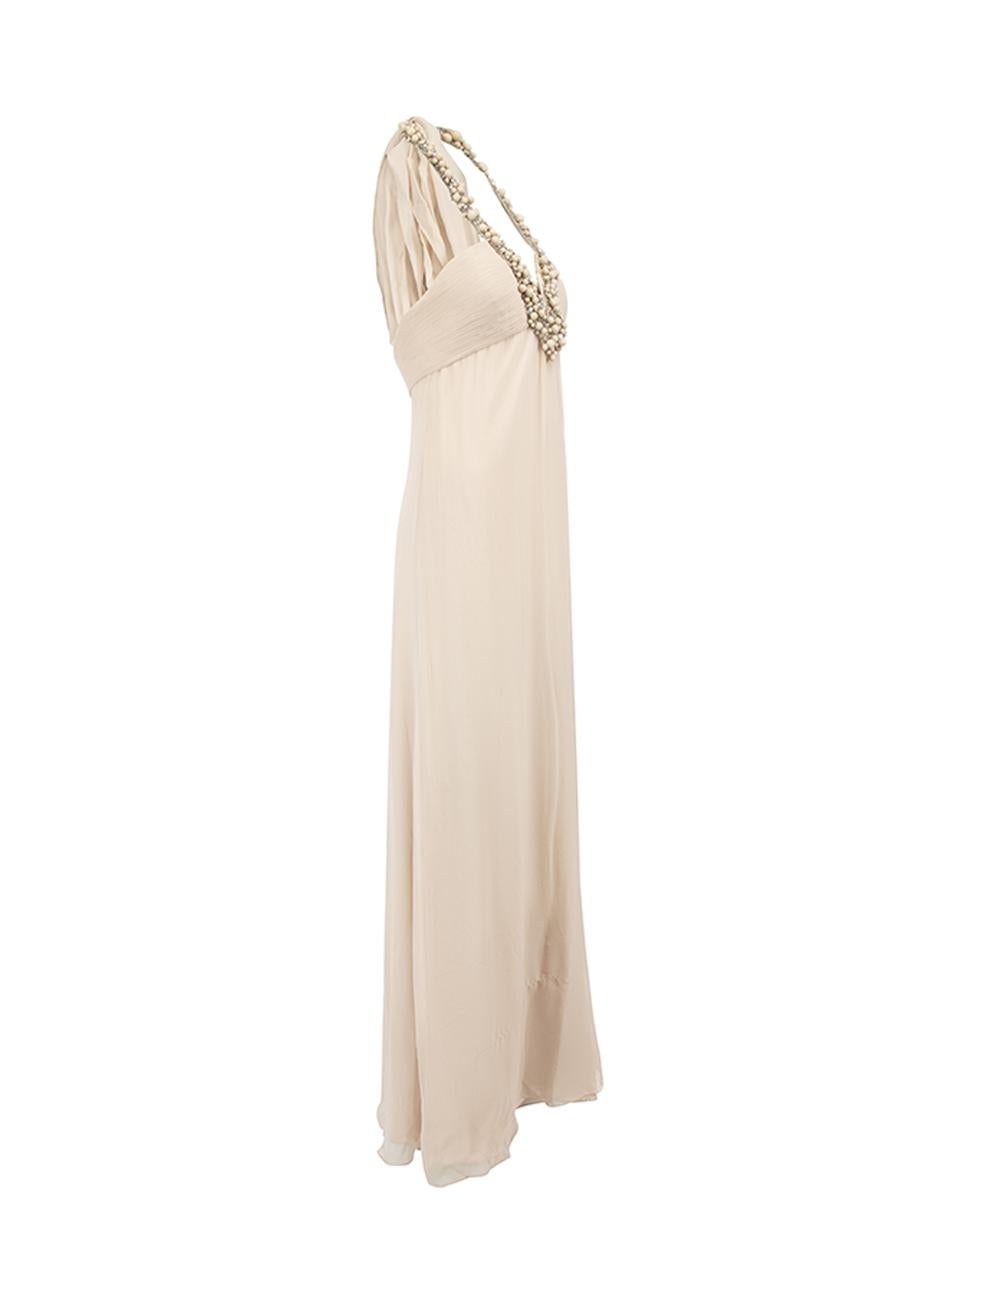 CONDITION is Very good. Minimal wear to dress is evident. Minimal wear and loose threads around the beaded neckline on this used Monique Lhuillier designer resale item. Details Beige Silk Gown Loose fit Sleeveless Halterneck Beaded neckline and